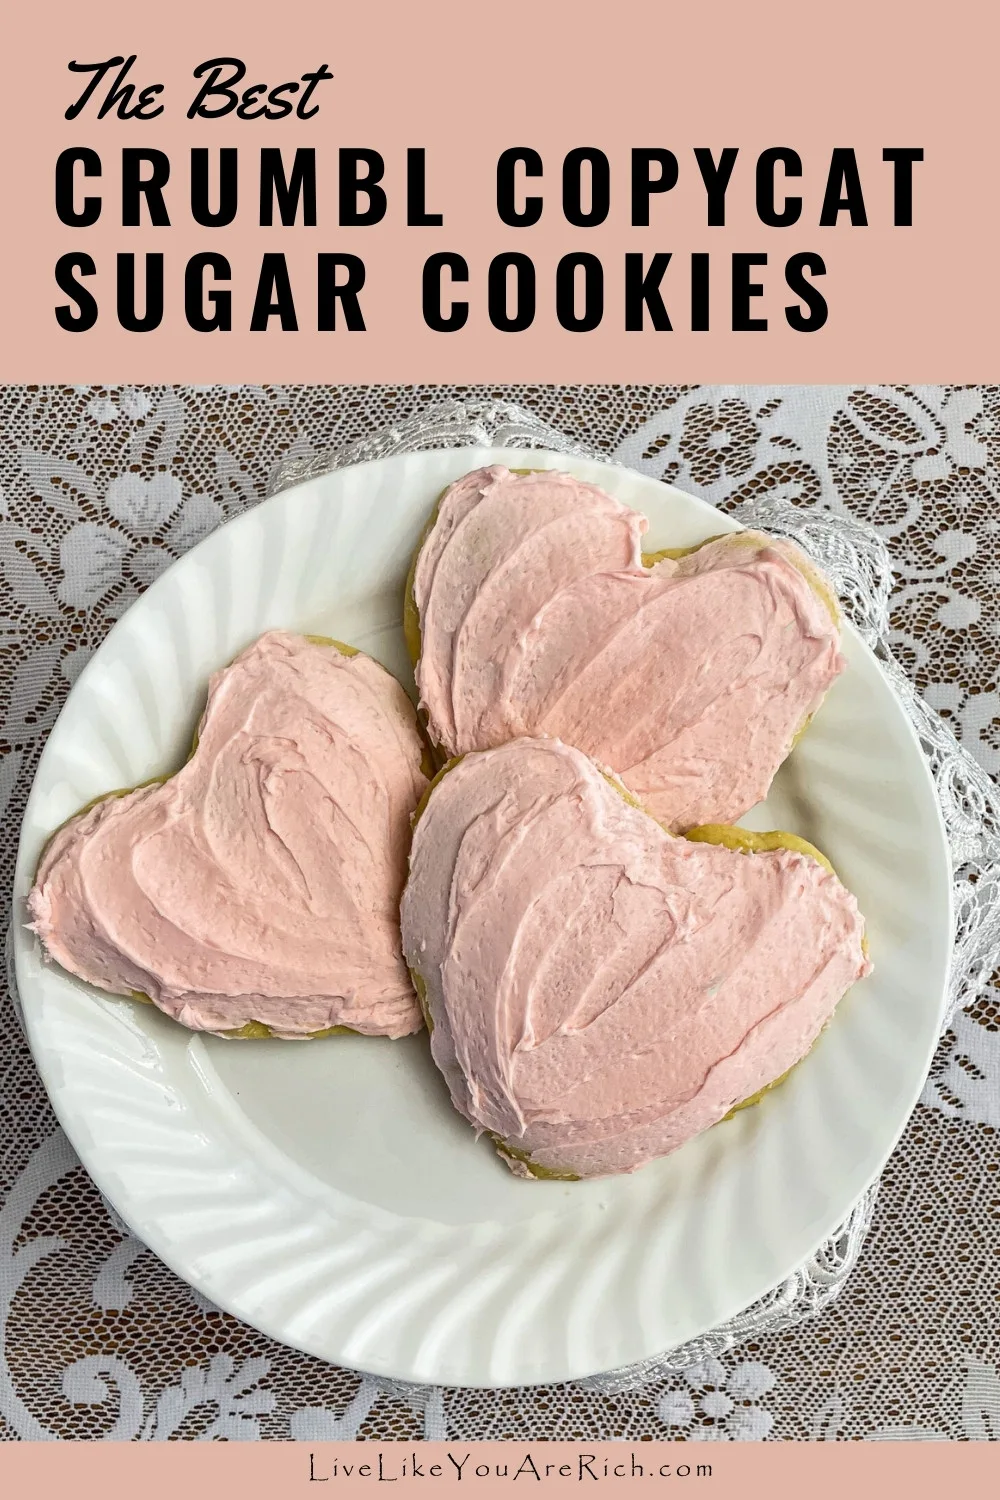 Valentine’s Heart Crumbl Copycat Sugar Cookies Recipe. These Crumbl copycat sugar cookies are even better than what you’d buy at the popular Crumbl cookie shop (my opinion of course).